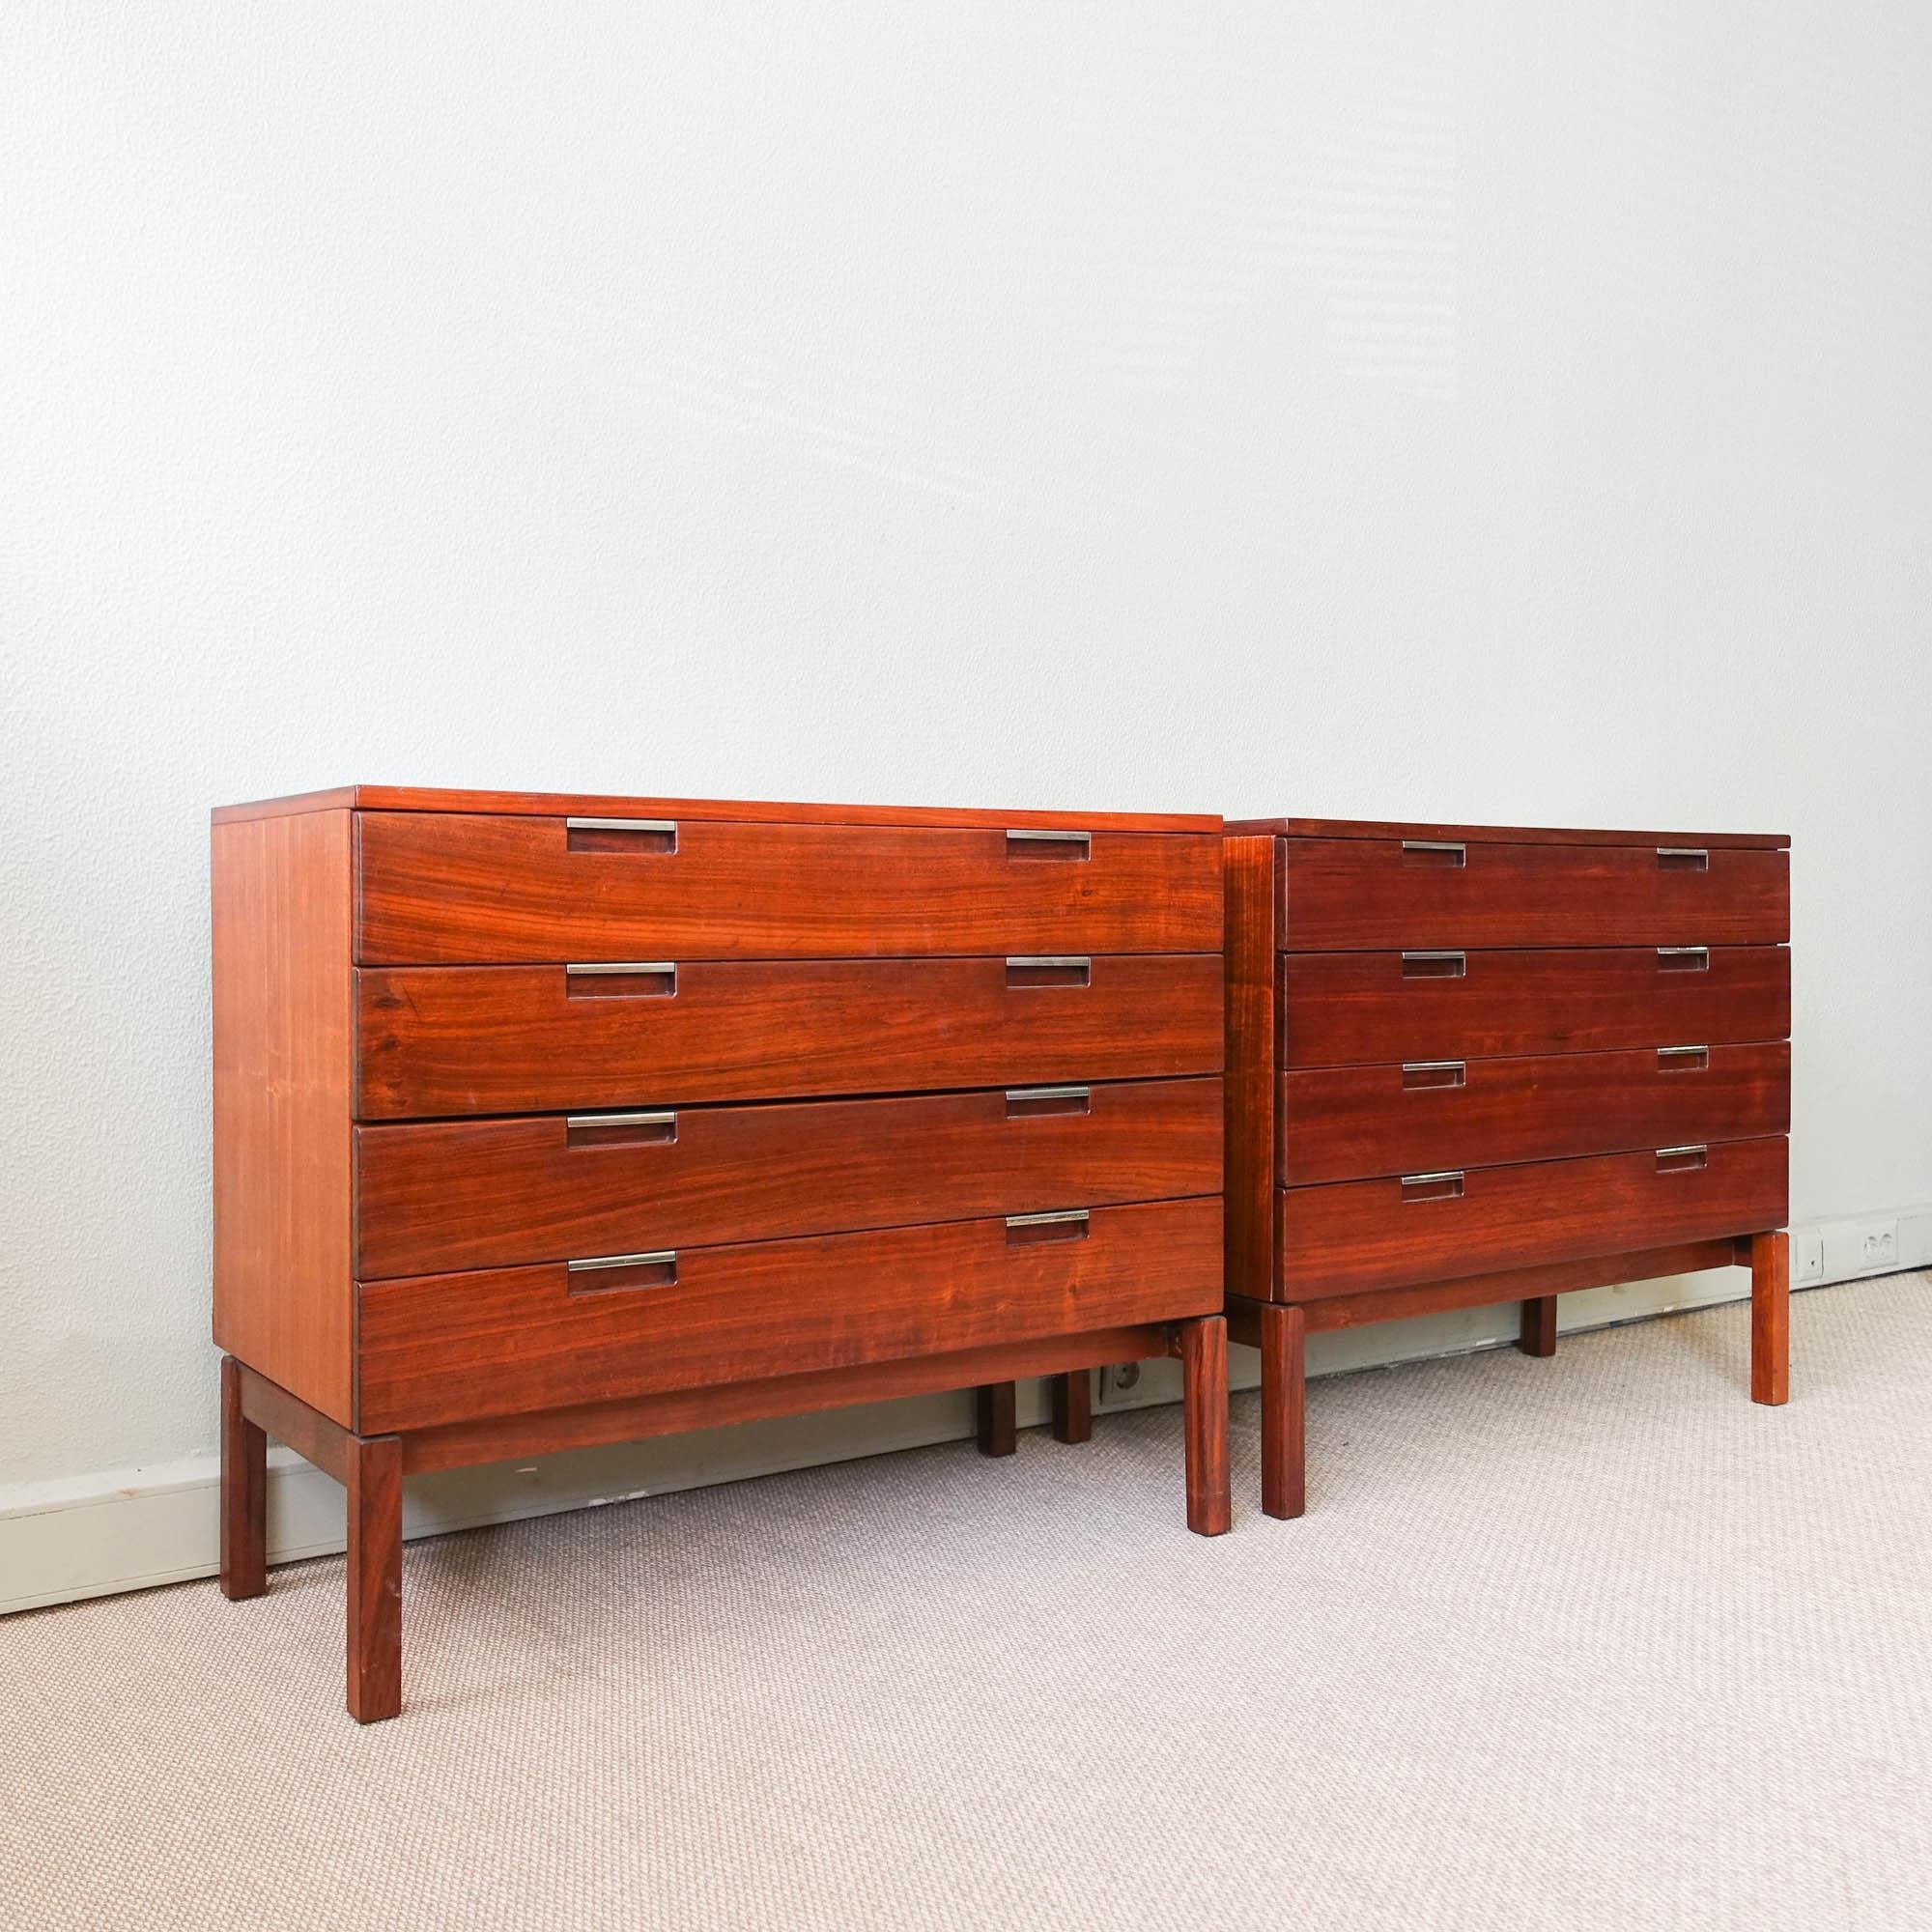 This pair of chest of drawers was designed and produced by FOC (Fábrica Osorio Castro), in Portugal during the 1970's. Each one is made of undianuno wood with chromed handles and features four drawers. In good vintage condition.